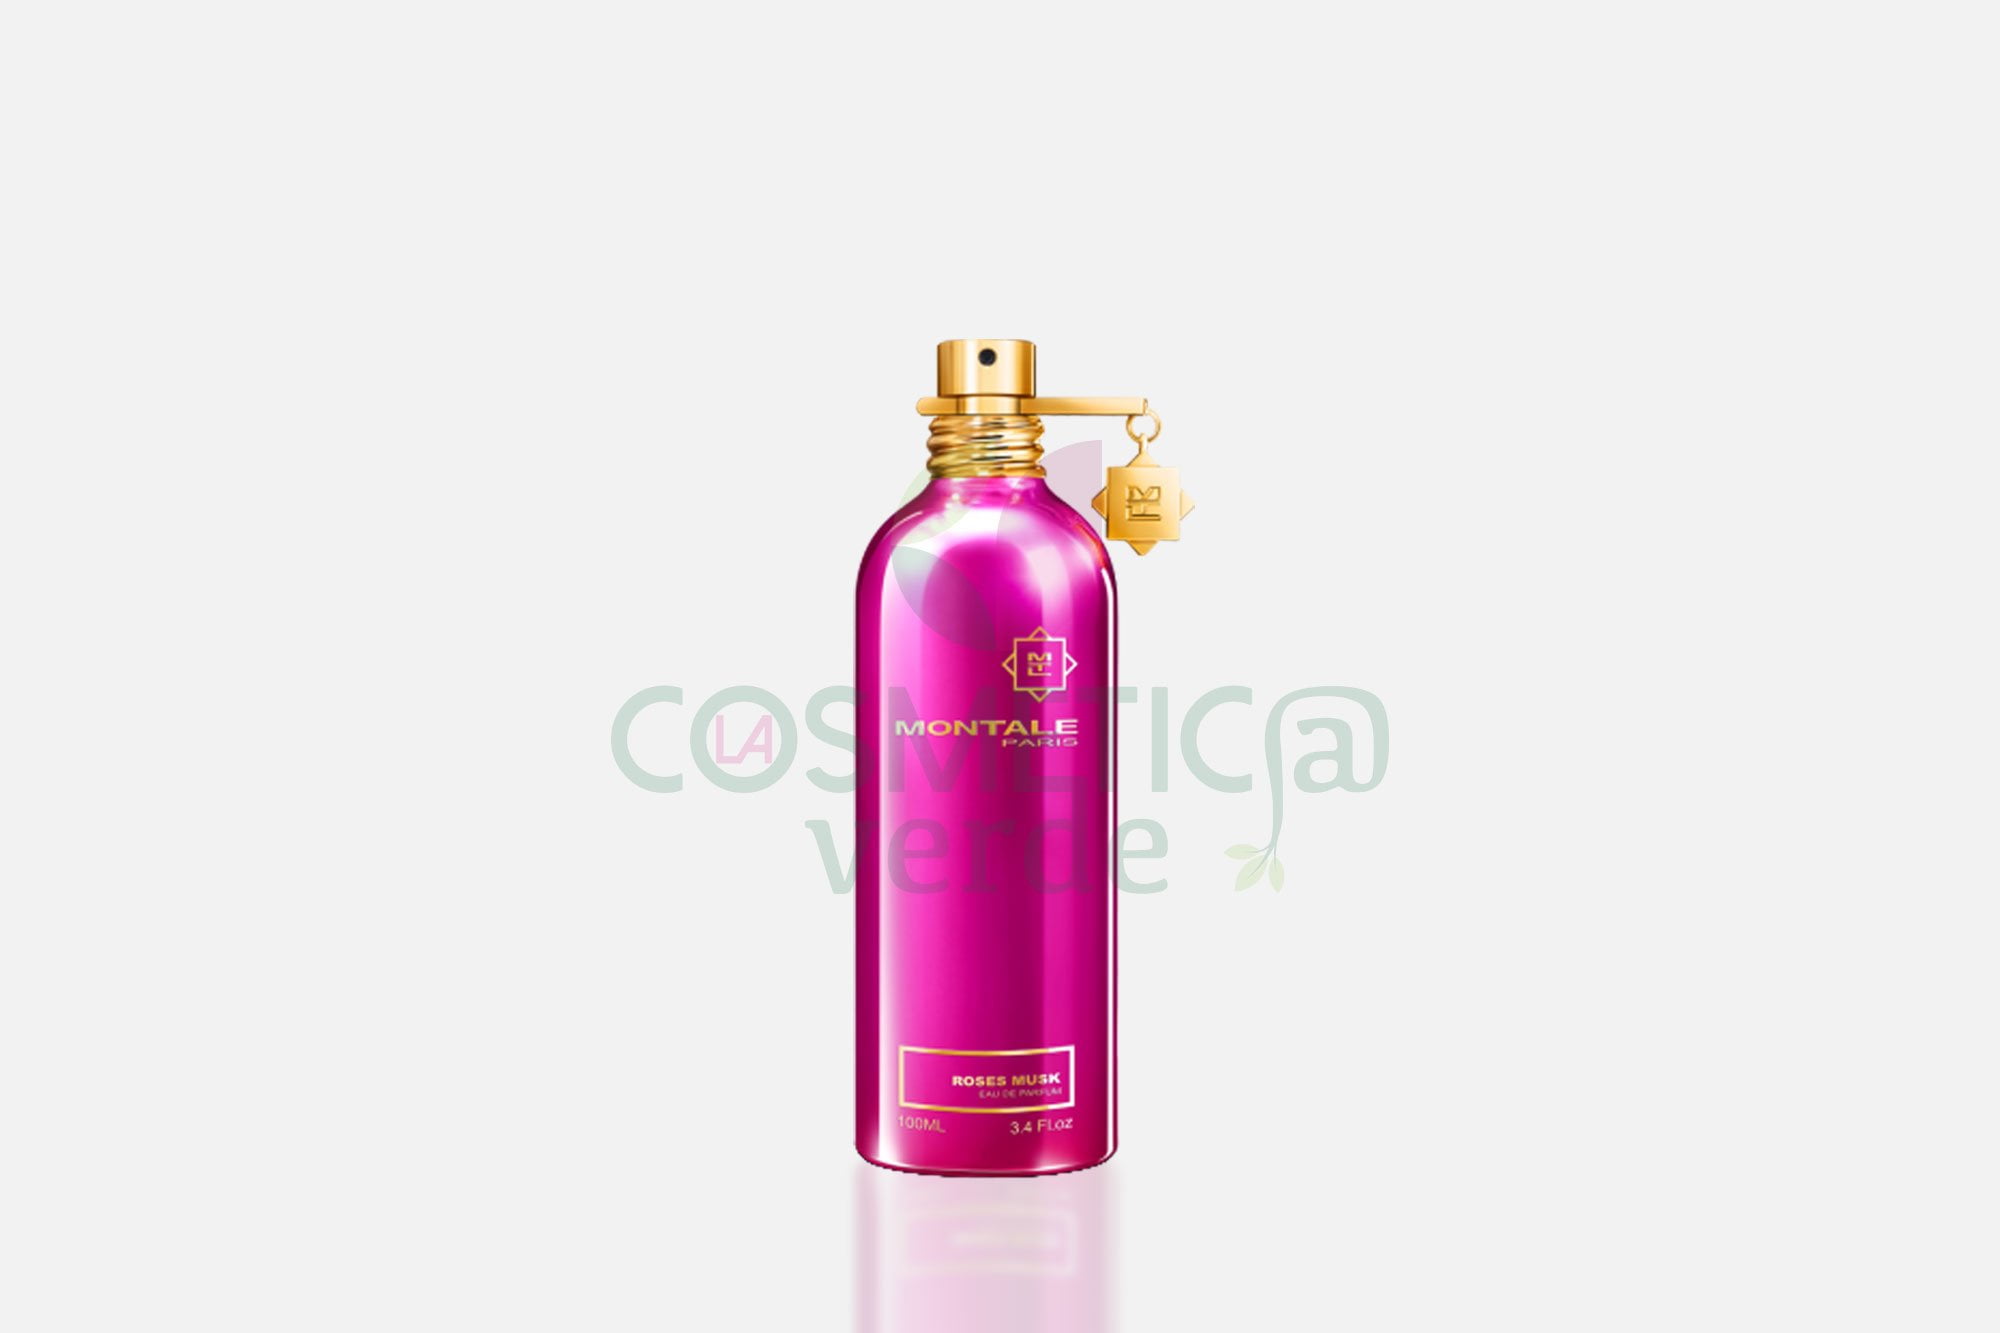 Roses Musk Montale